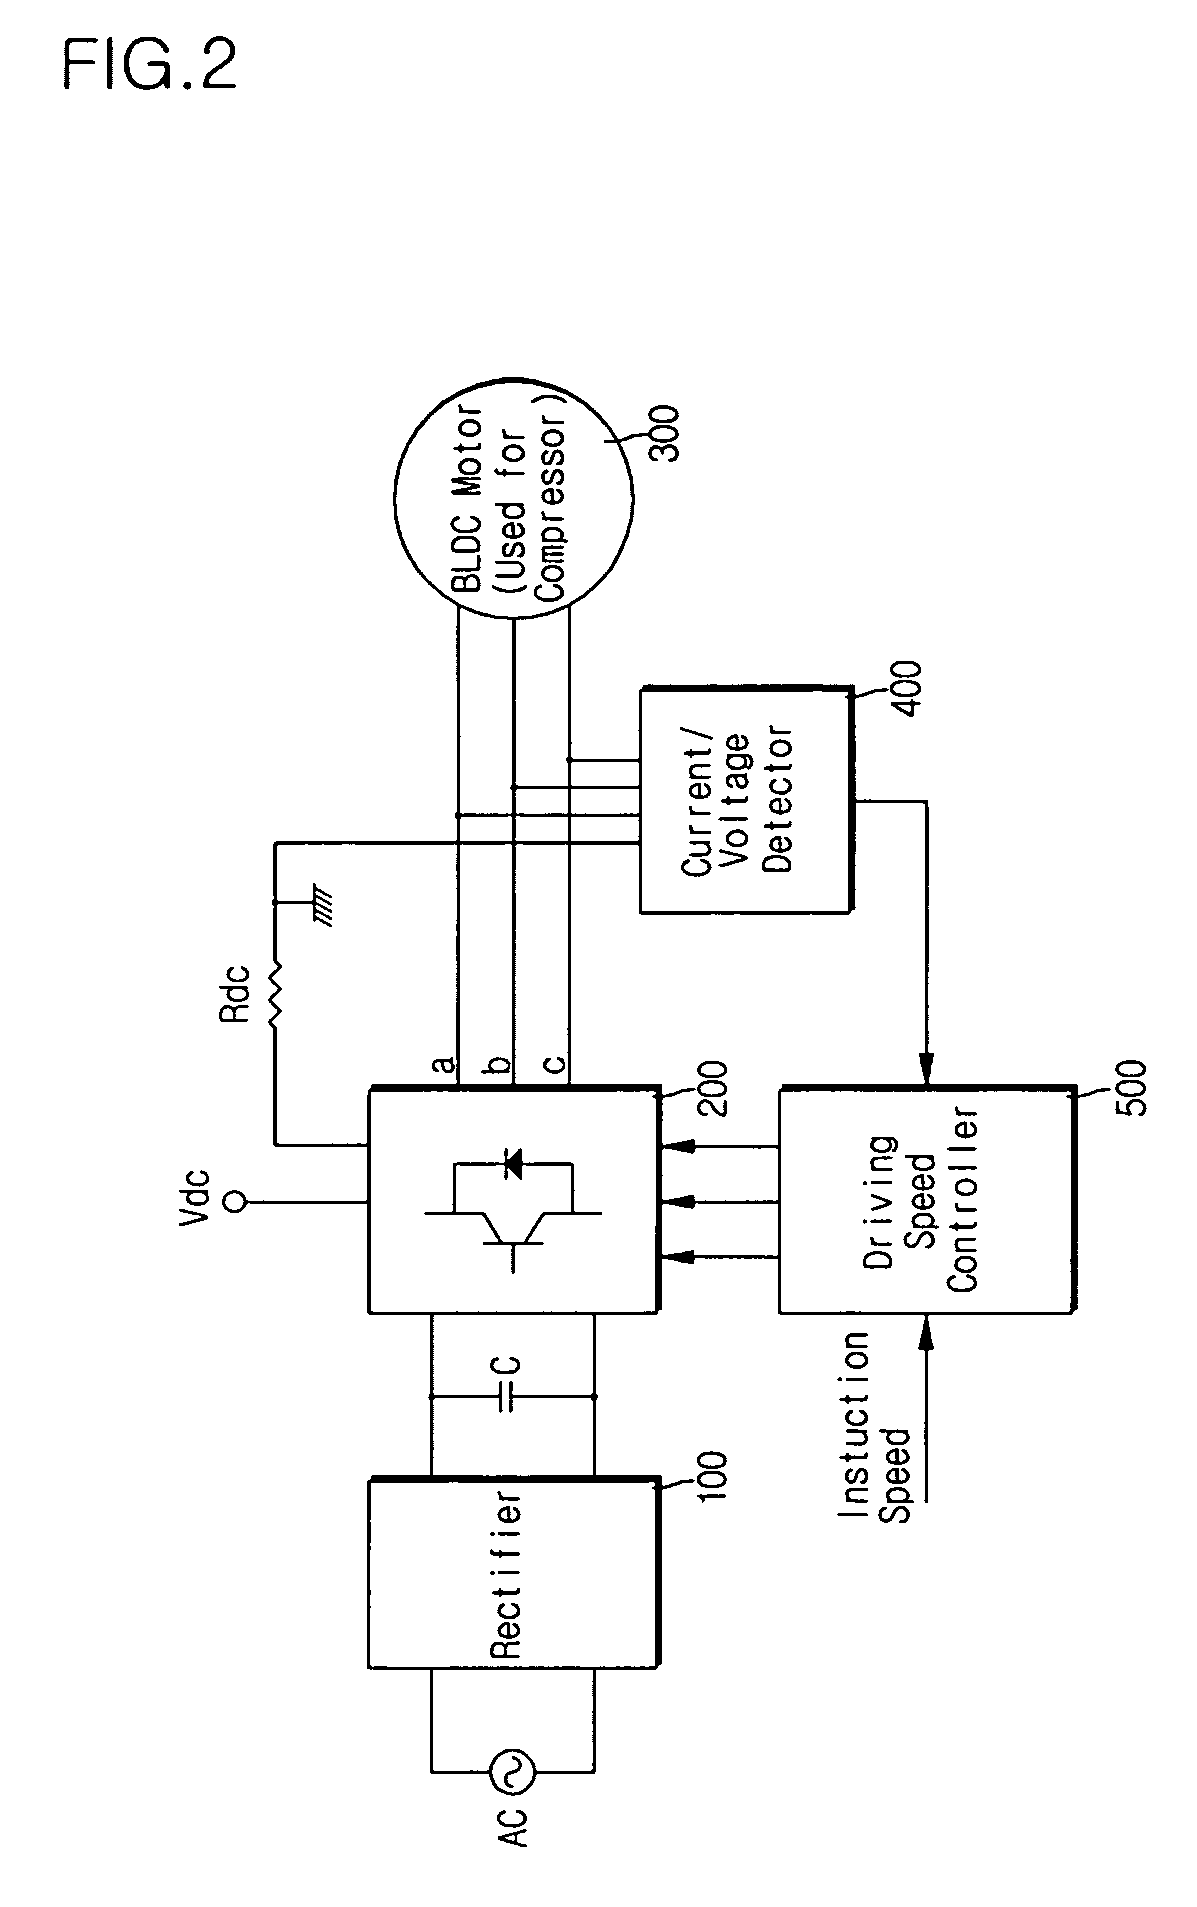 Method of controlling motor drive speed